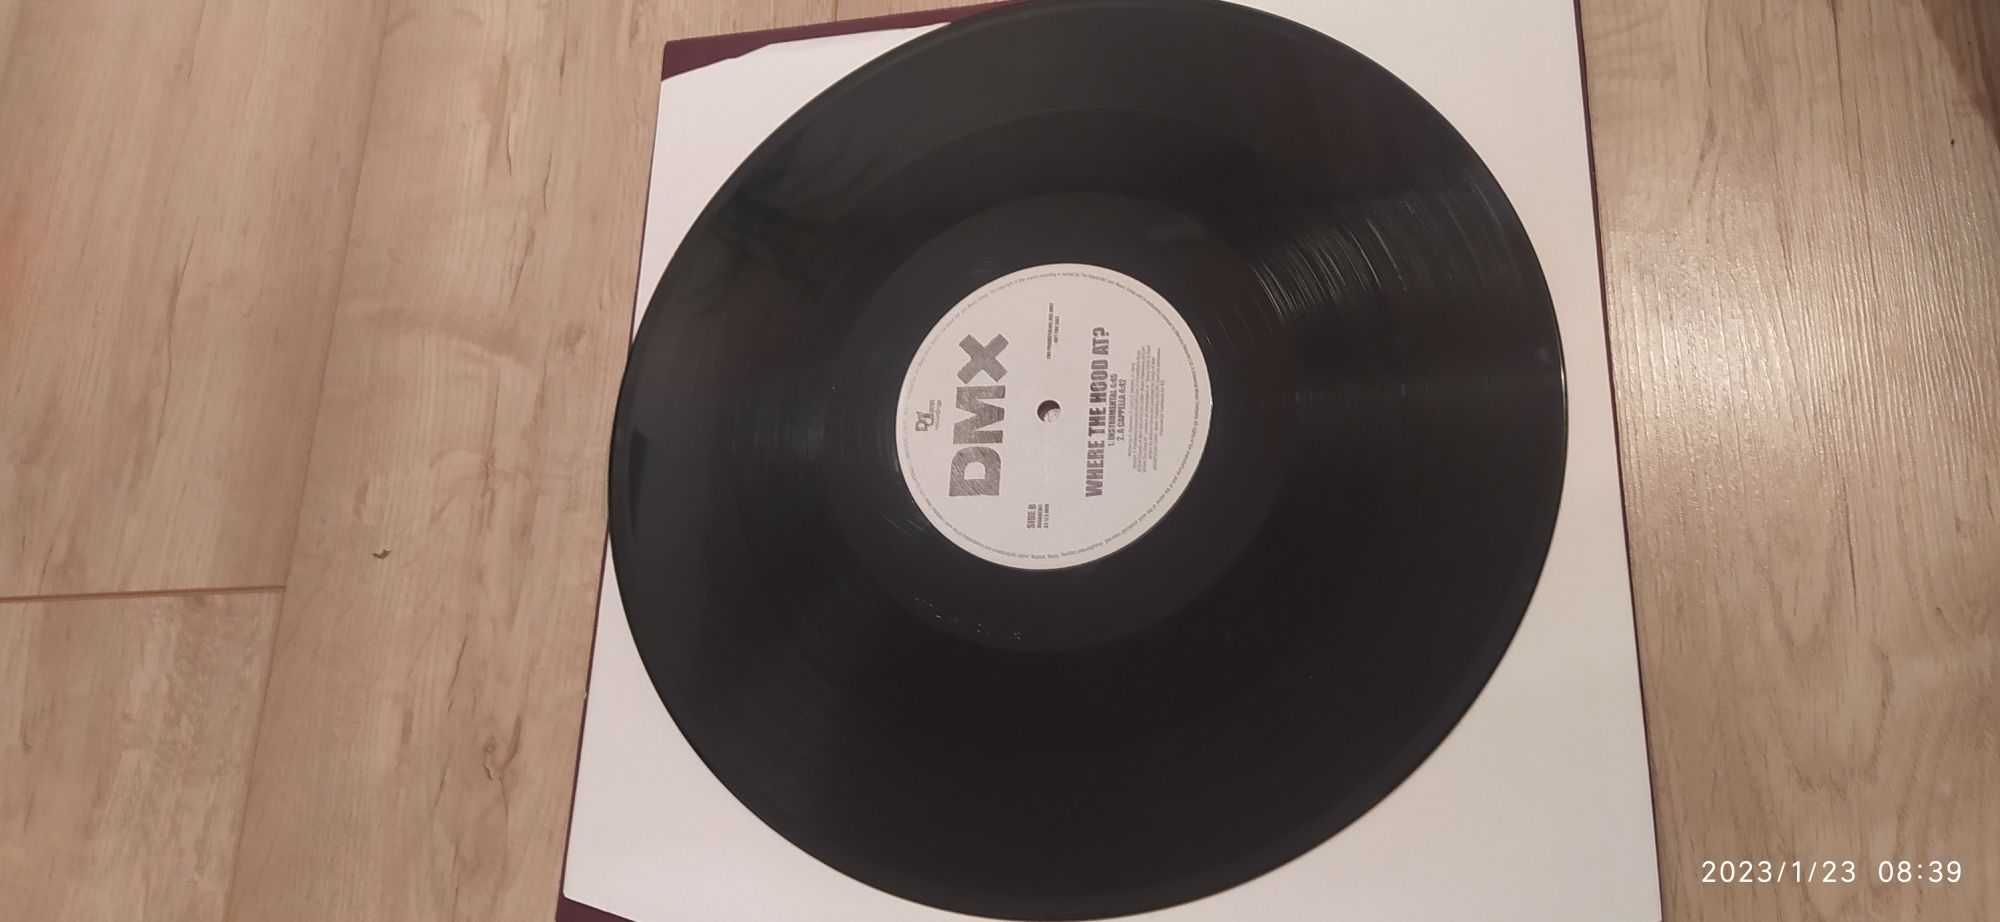 DMX X Gon' Give It to Ya+Where the hood at 12" 2 x Single Def Jam 2003